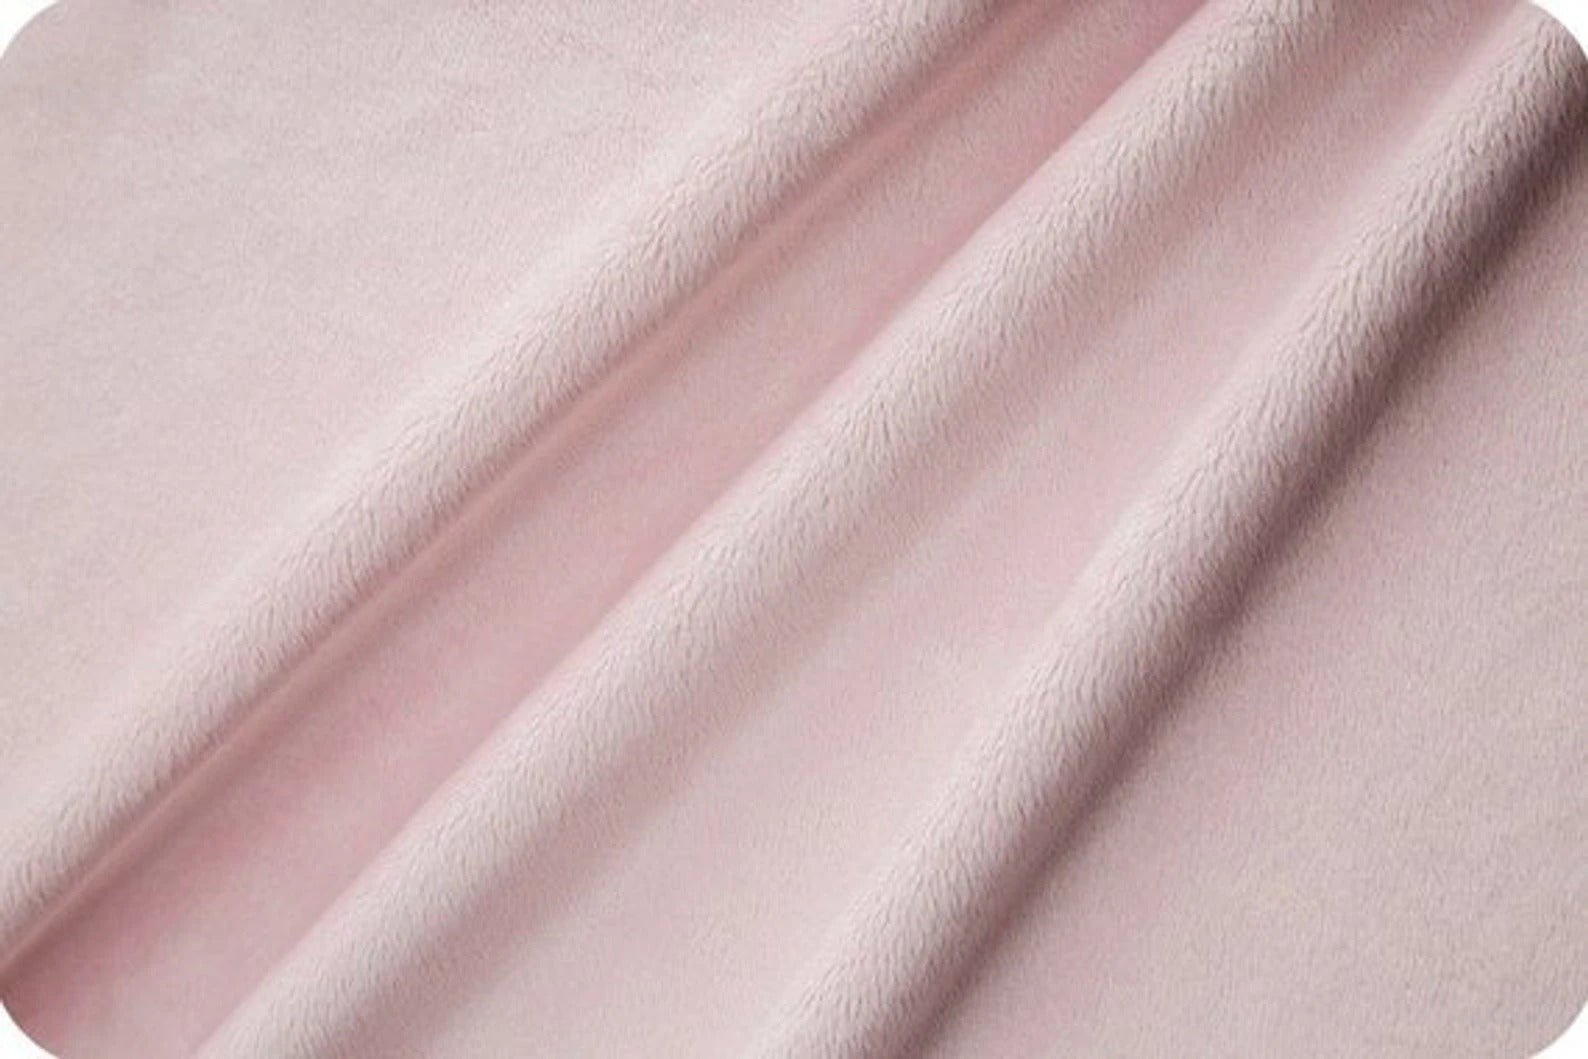 Soft and Snuggly Minky Fabric 3 mm Pile Sold By The YardMinkyICEFABRICICE FABRICSLight PinkBy The Yard (60 inches Wide)Soft and Snuggly Minky Fabric 3 mm Pile Sold By The Yard ICEFABRIC